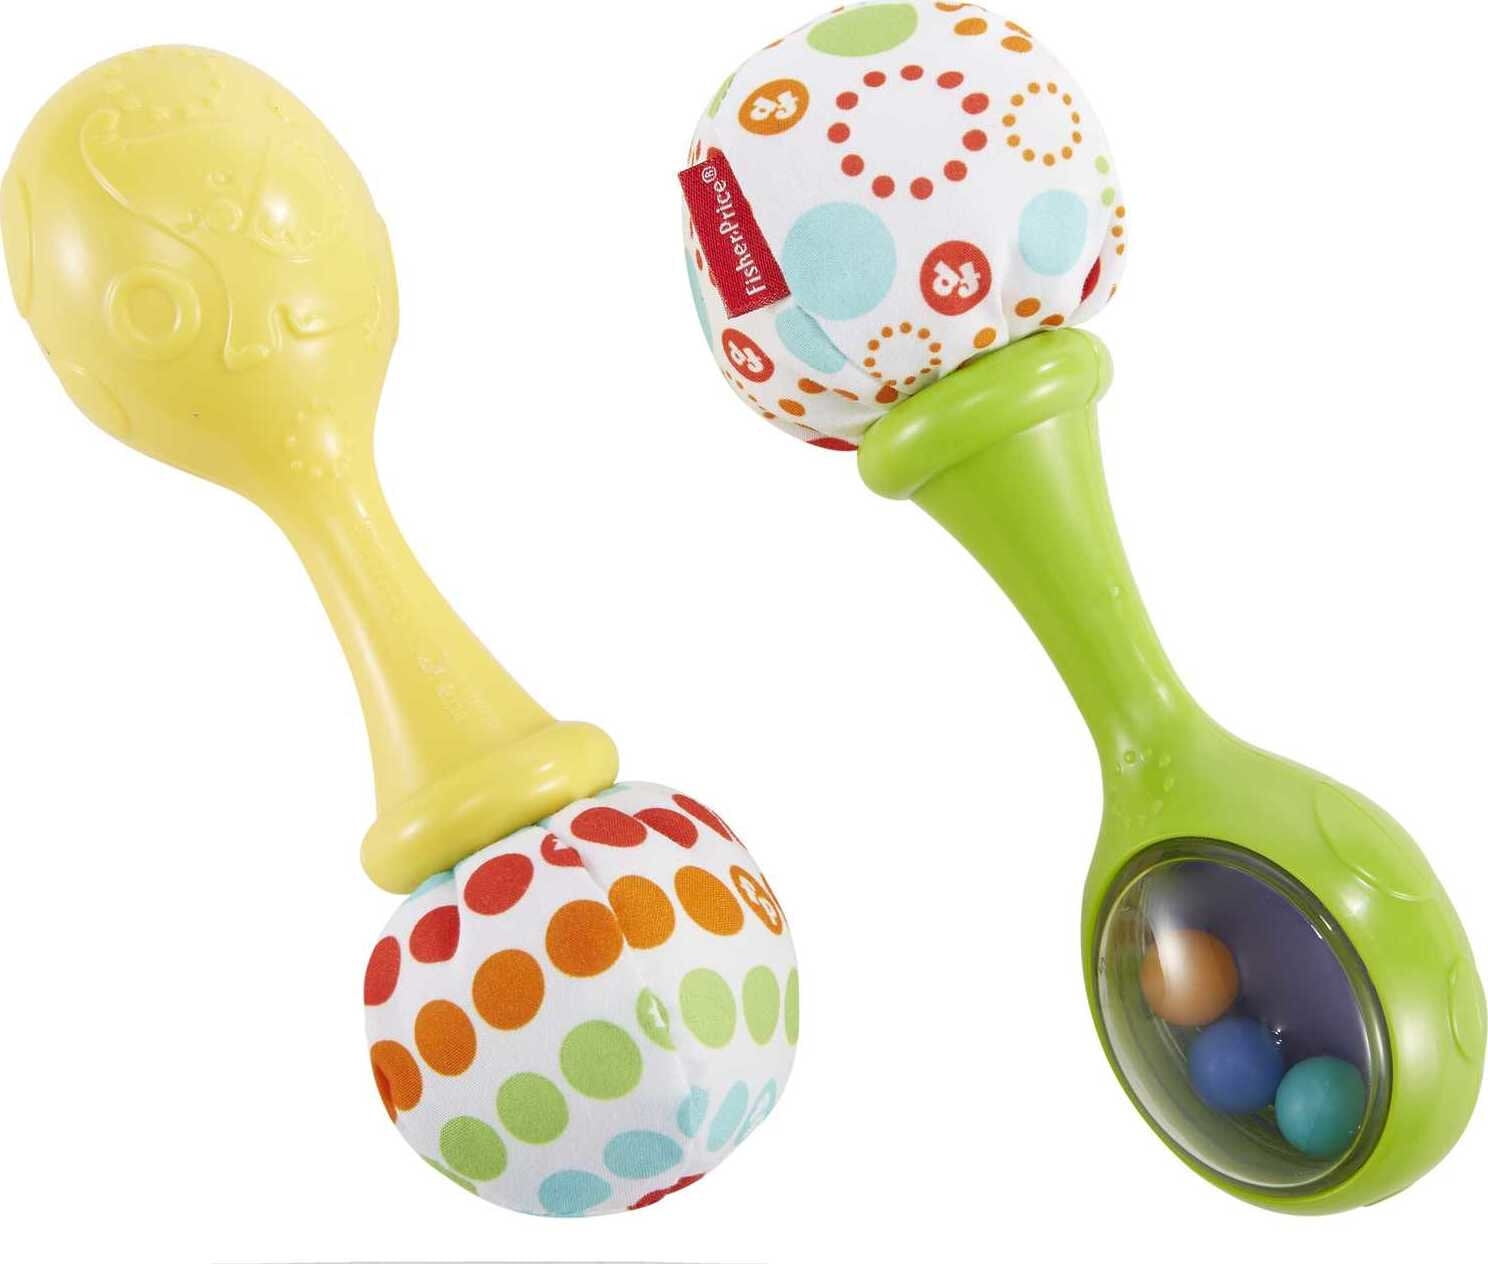 Fisher-Price Baby Toys Rattle 'n Rock Maracas, Set of 2 Soft Musical  Instruments for Infants 3+ Months, Green & Yellow